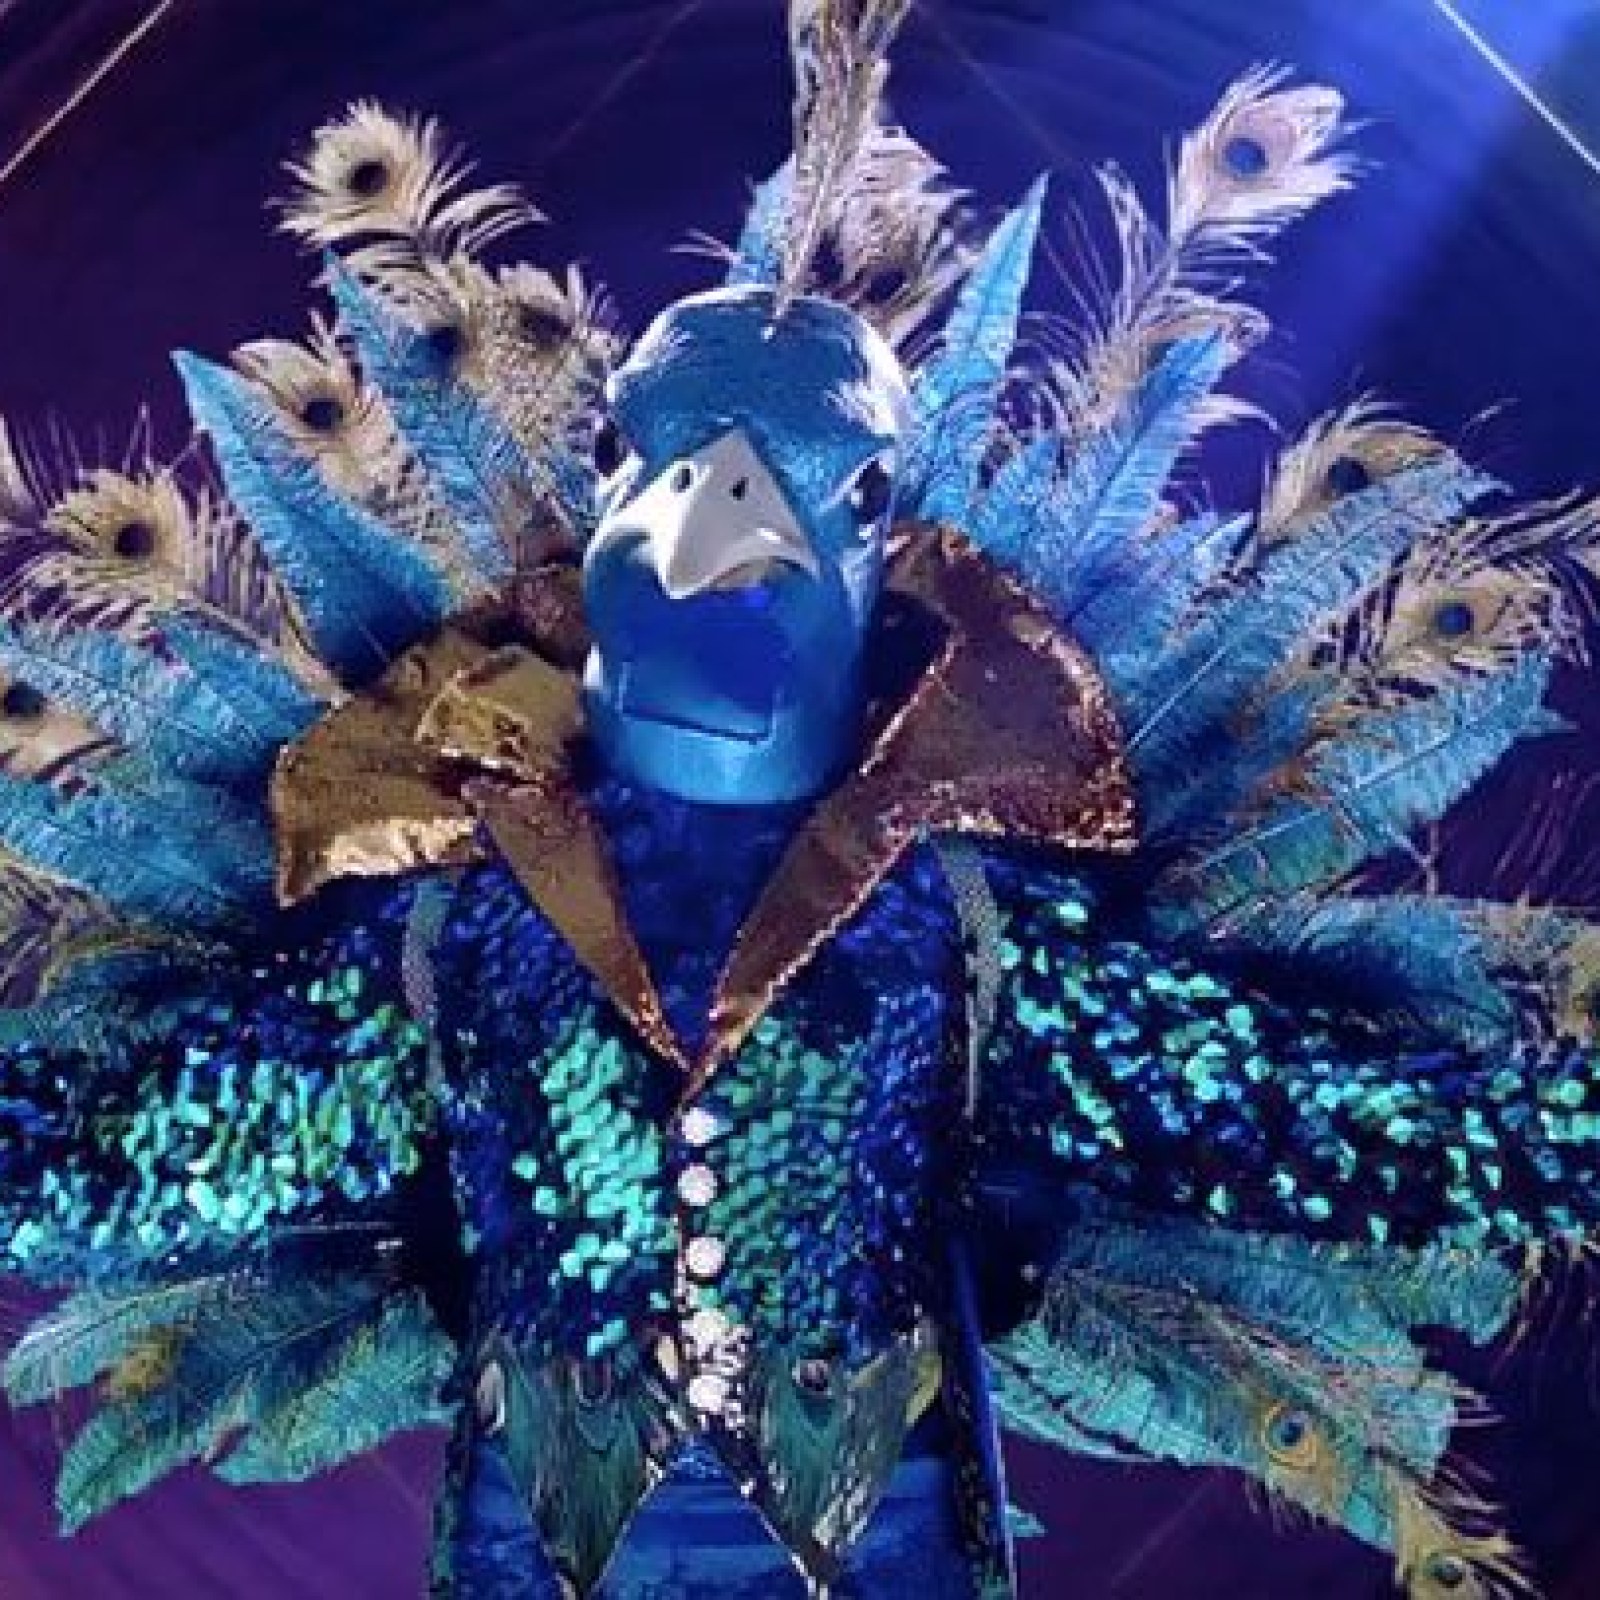 Uendelighed deform Forenkle Who Is Behind the Peacock Mask on 'Masked Singer'? Here Are Some Guesses